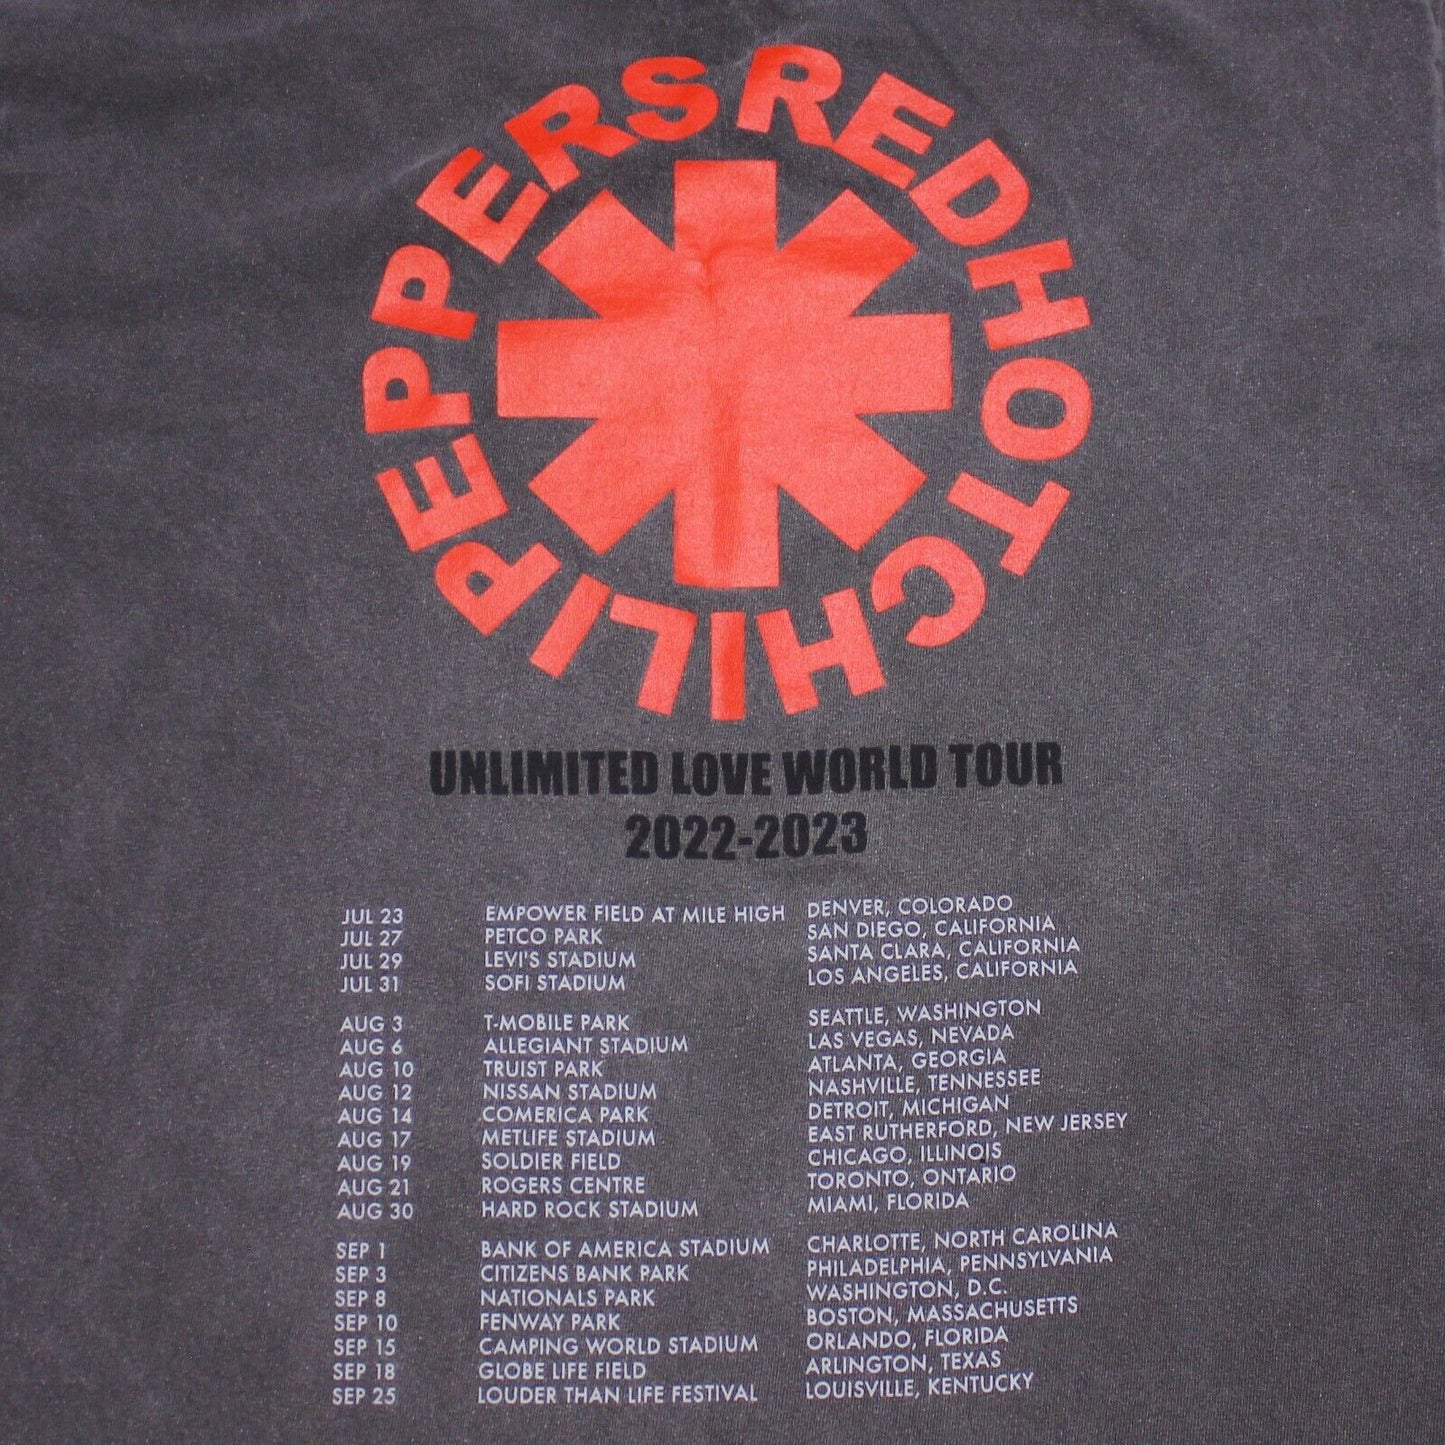 Red Hot Chili Peppers Unlimited Love Tour 2002-2003 Grey Shirt - Men's Medium